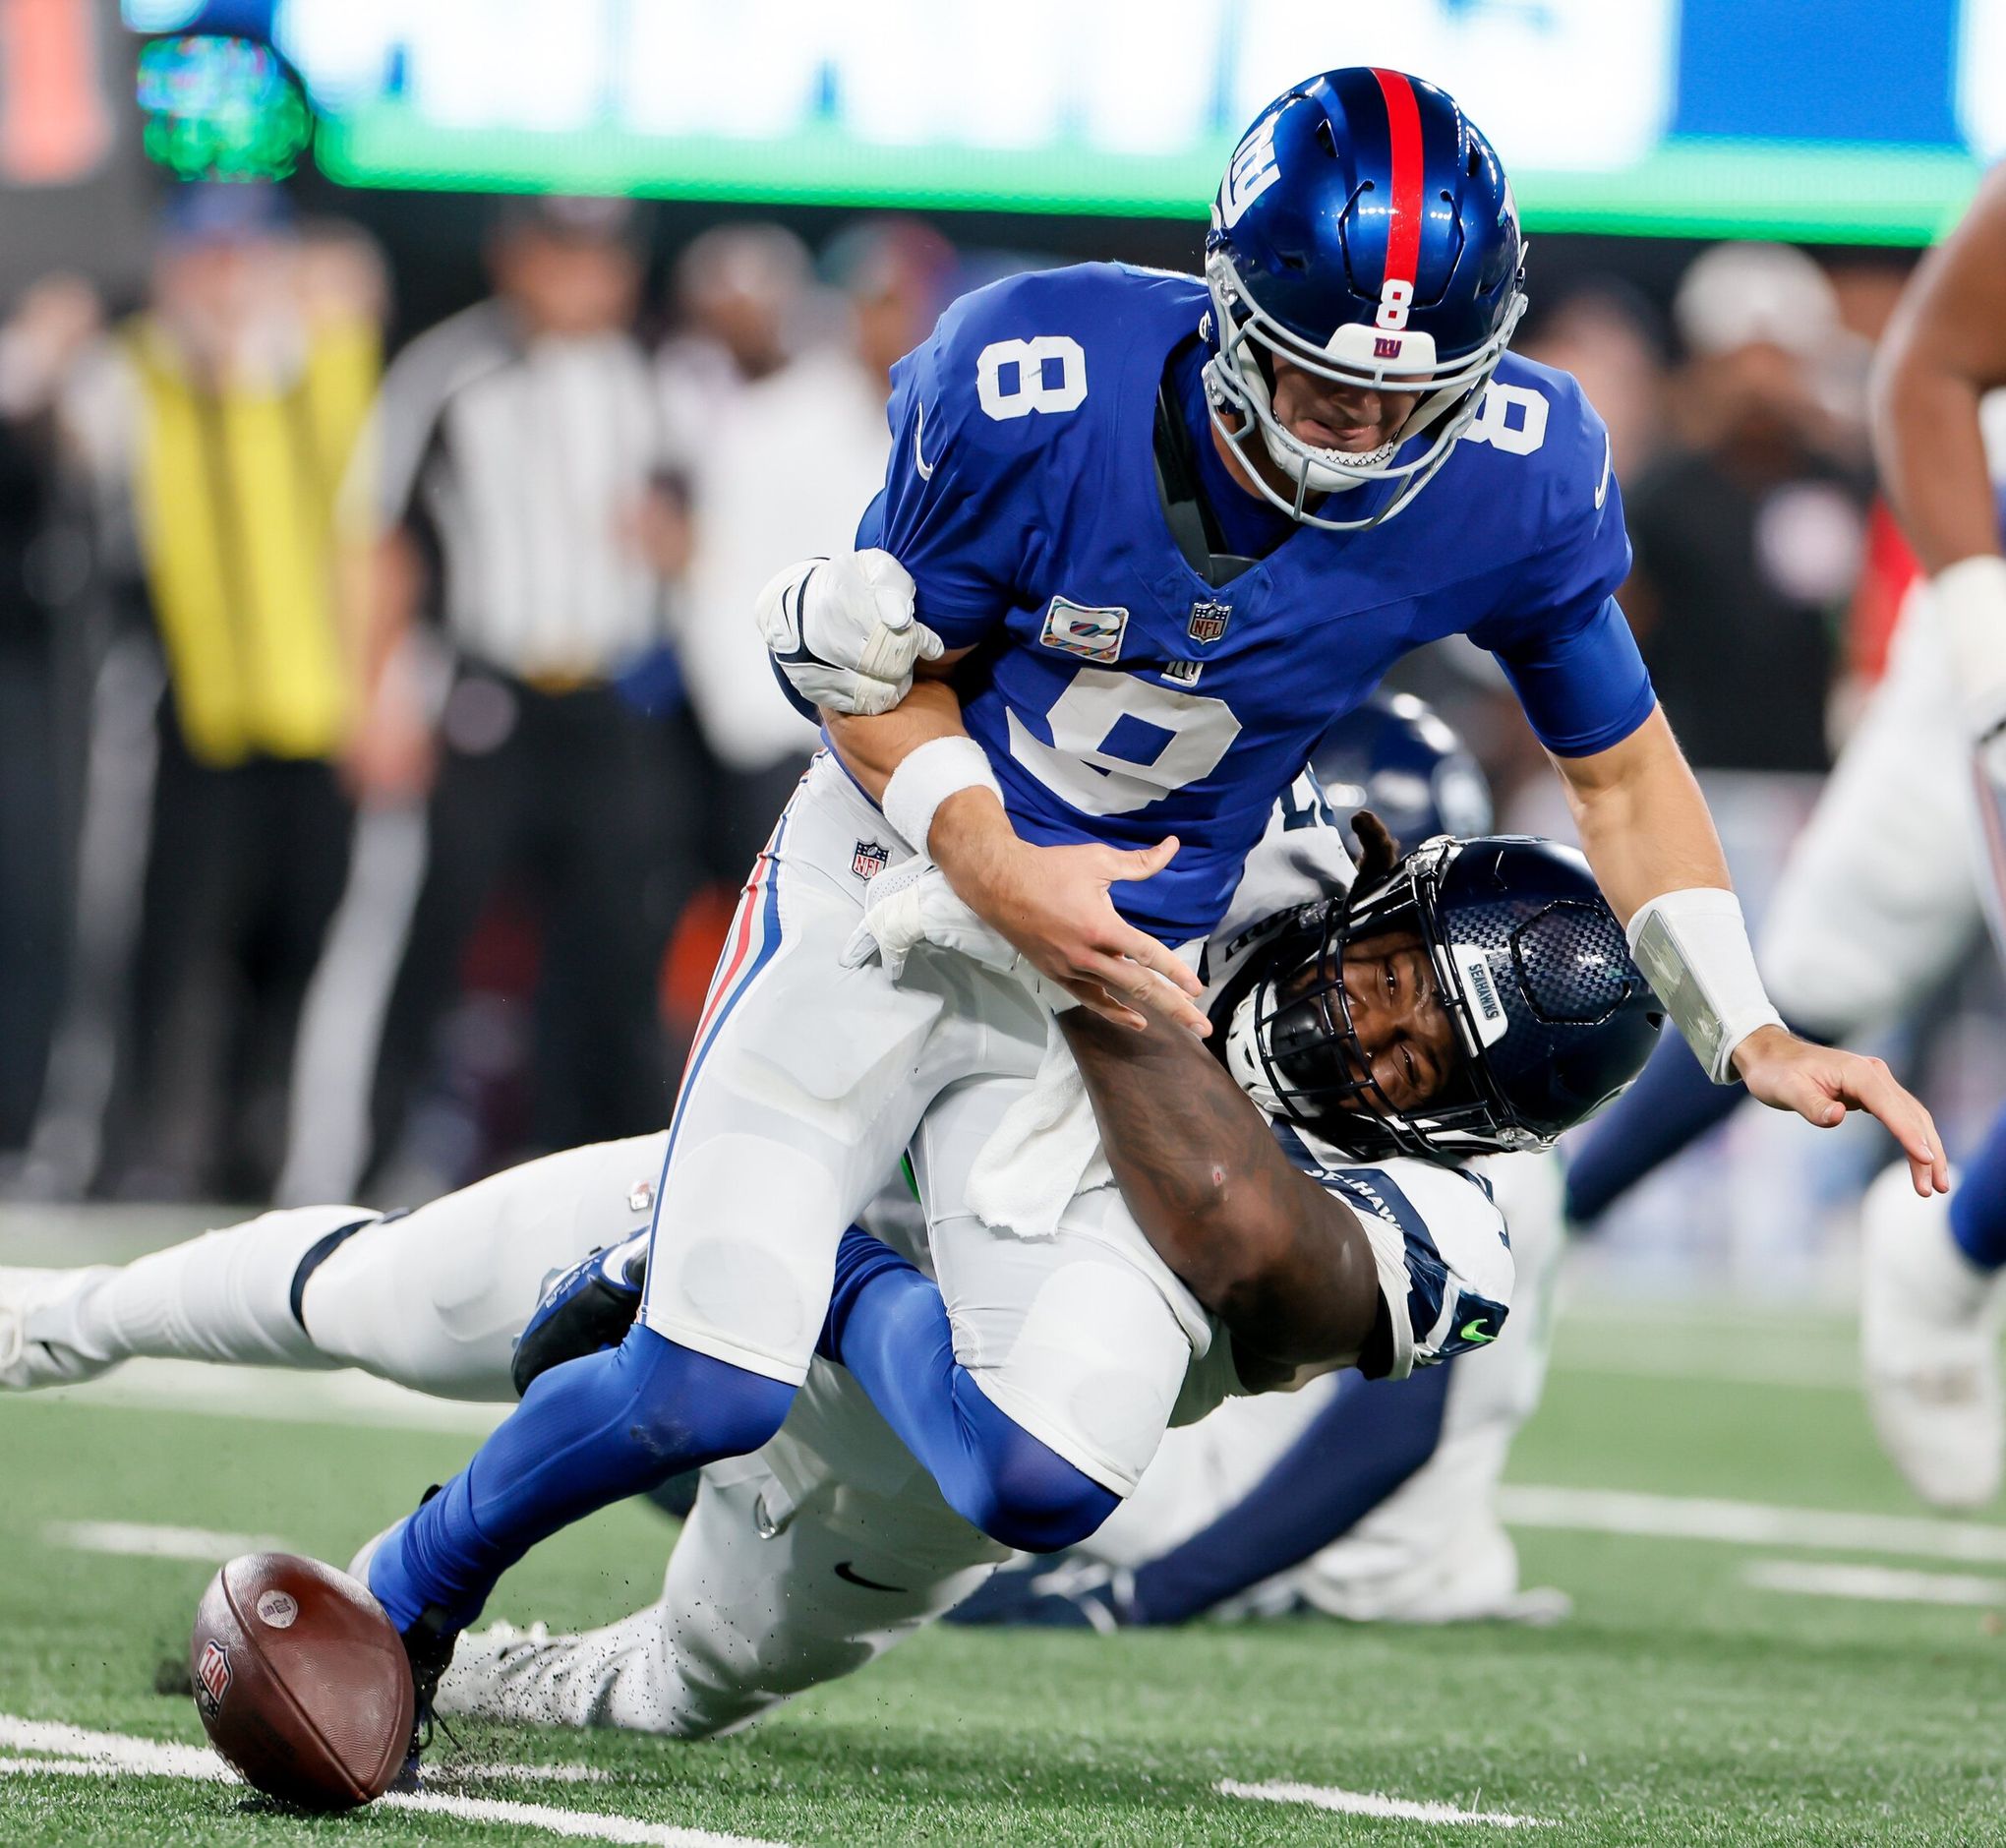 Giants vs. Cowboys: Time, television, radio and streaming schedule